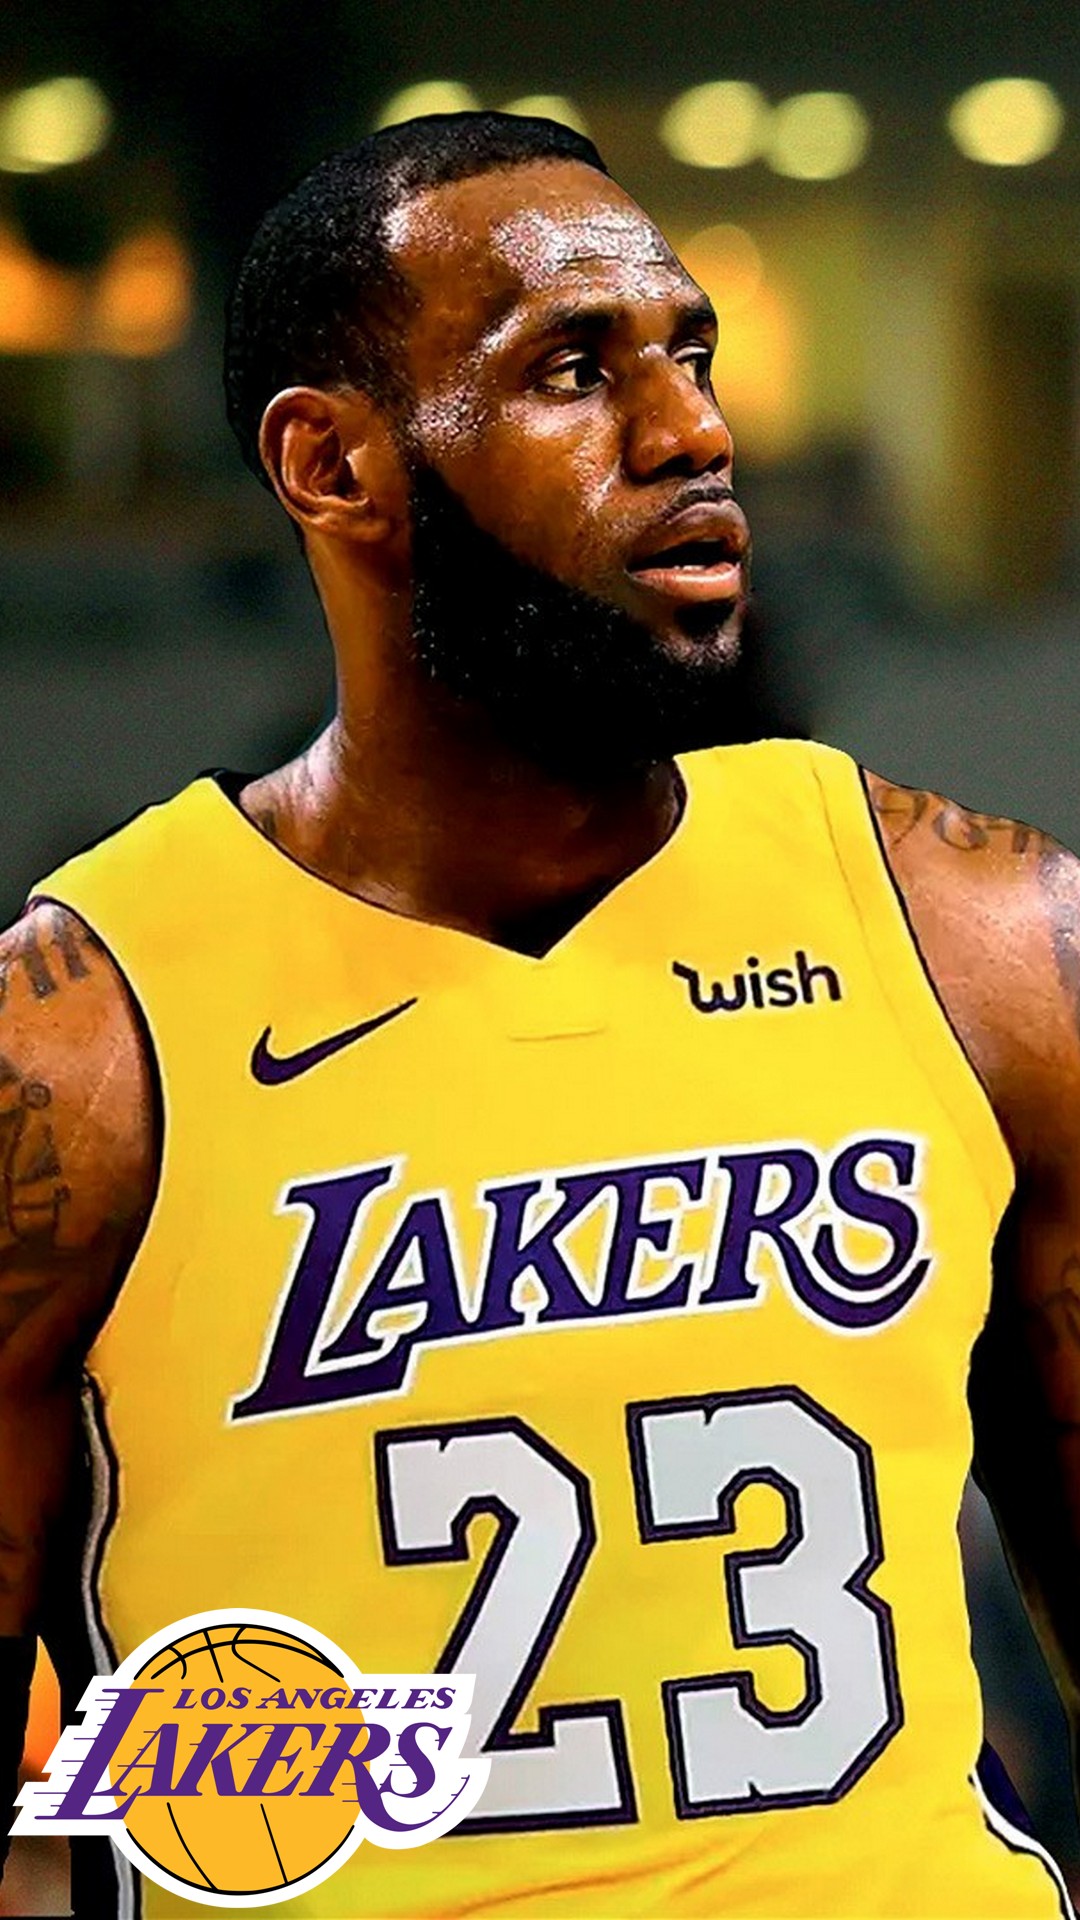 Lebron James Lakers Iphone 6 Wallpaper With Image Dimensions - Iphone 6 Wallpaper Lebron James - HD Wallpaper 